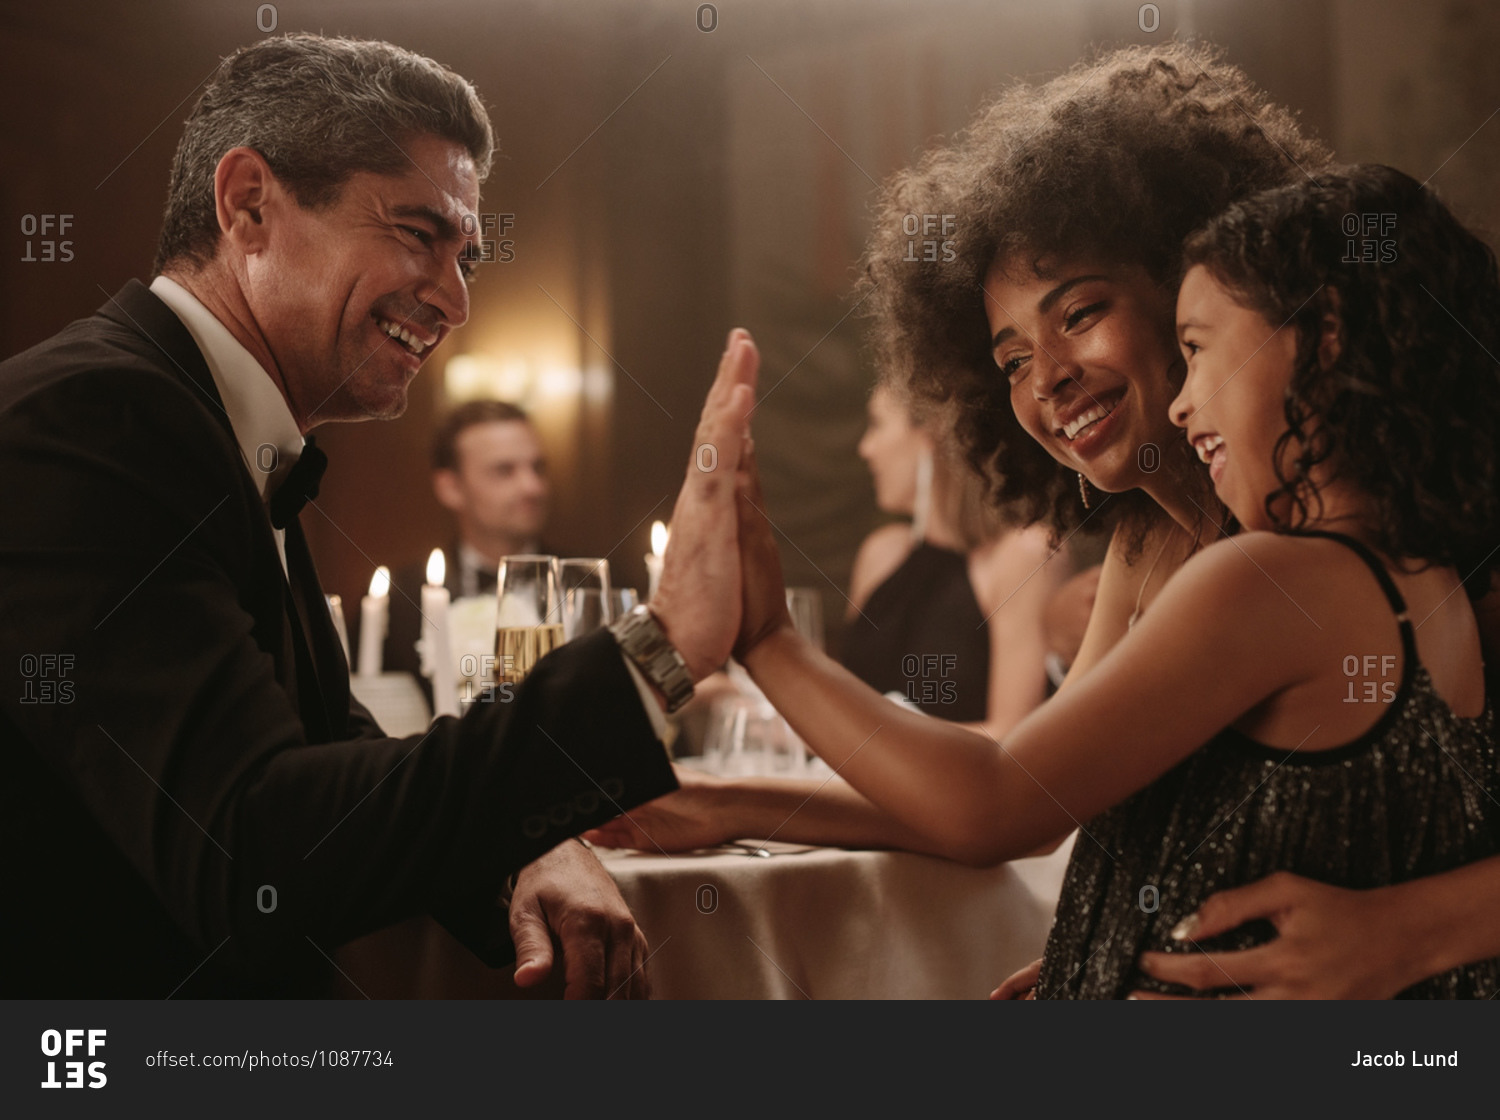 Mature man playing with a girl at dinner party with friends sitting around a dining table. Man giving high five to a little girl at gala night party.